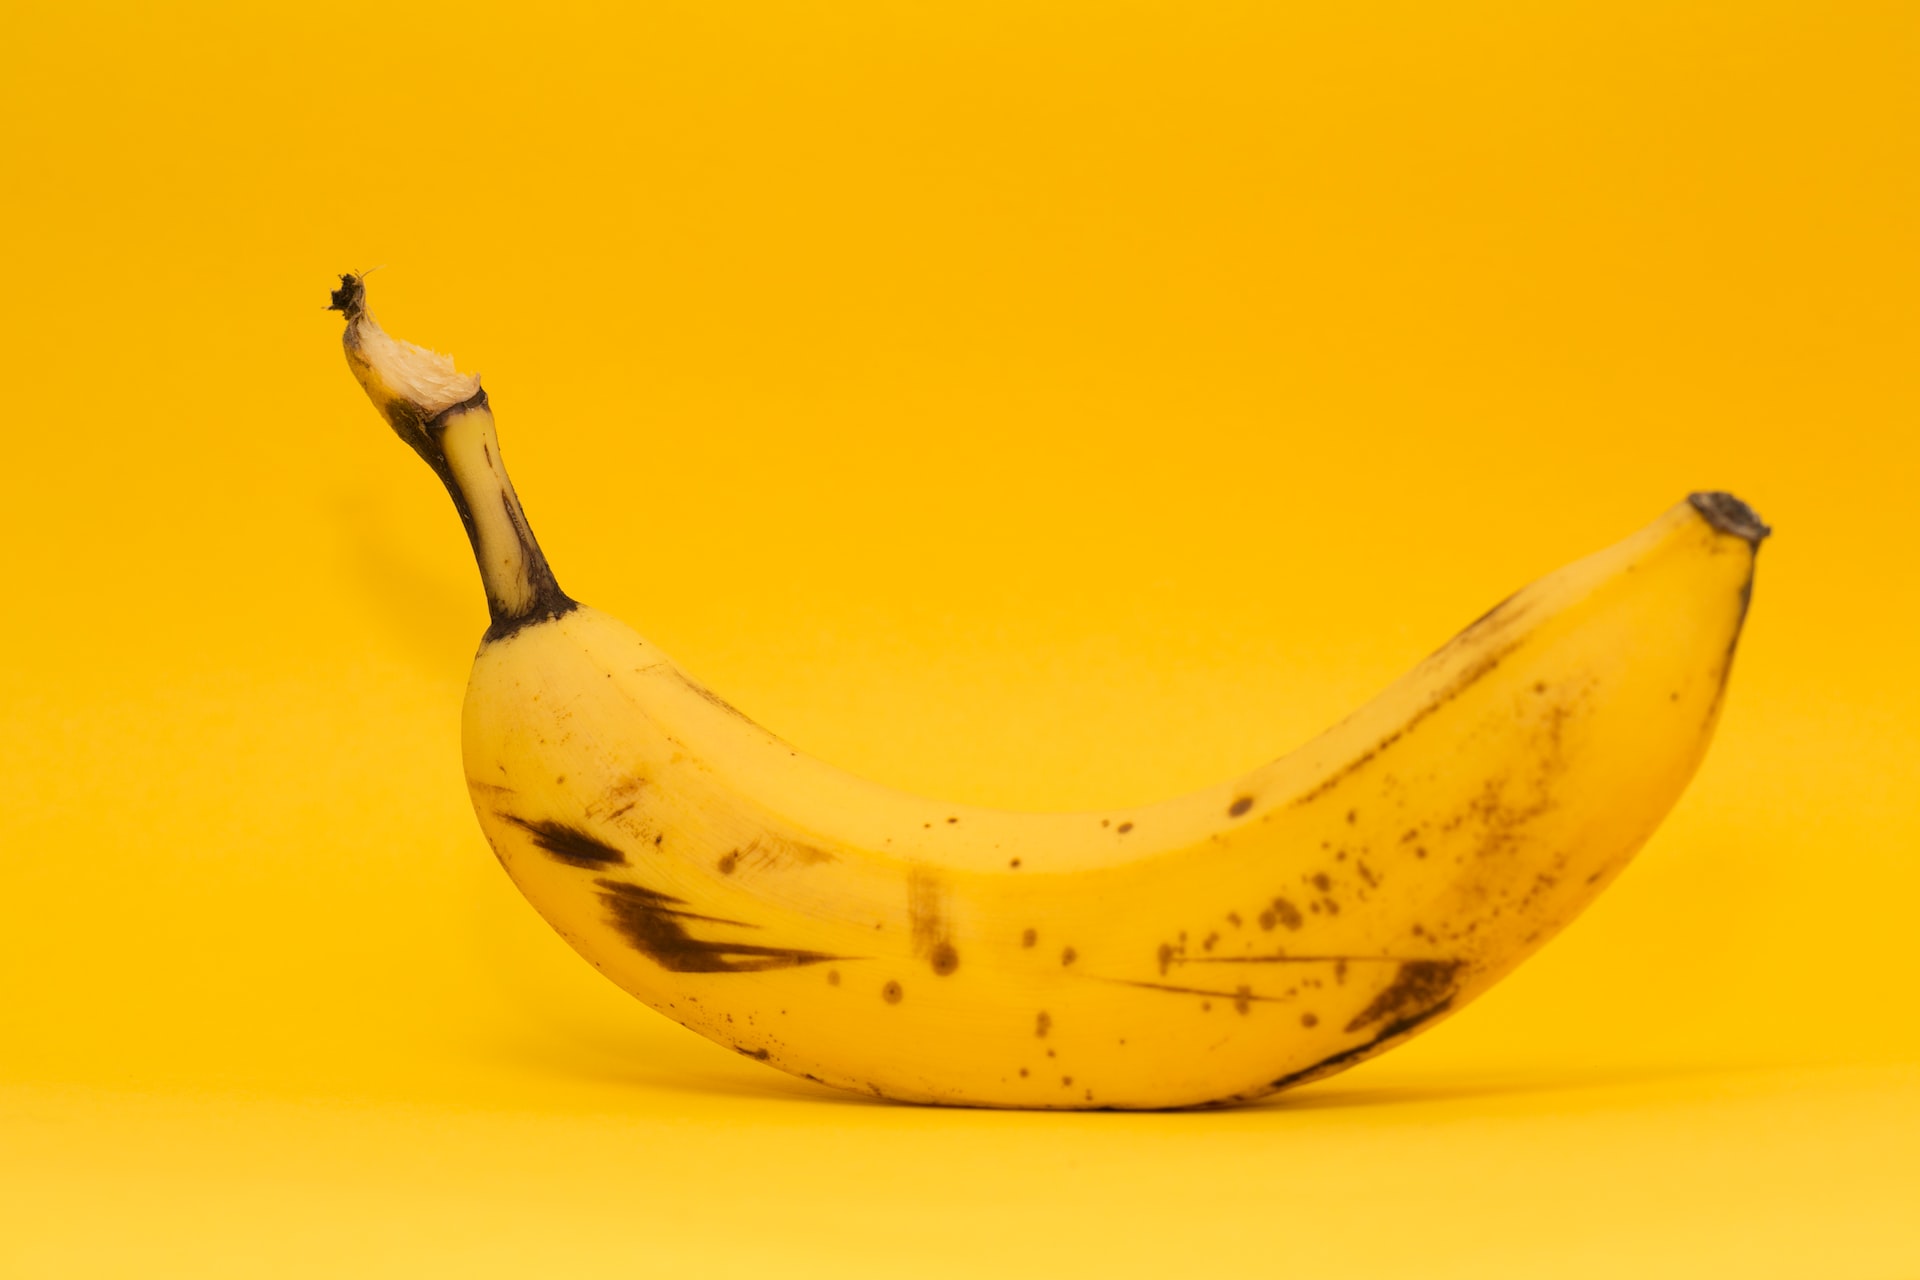 From Southeast Asia to Your Plate: The Fascinating Story of the Banana